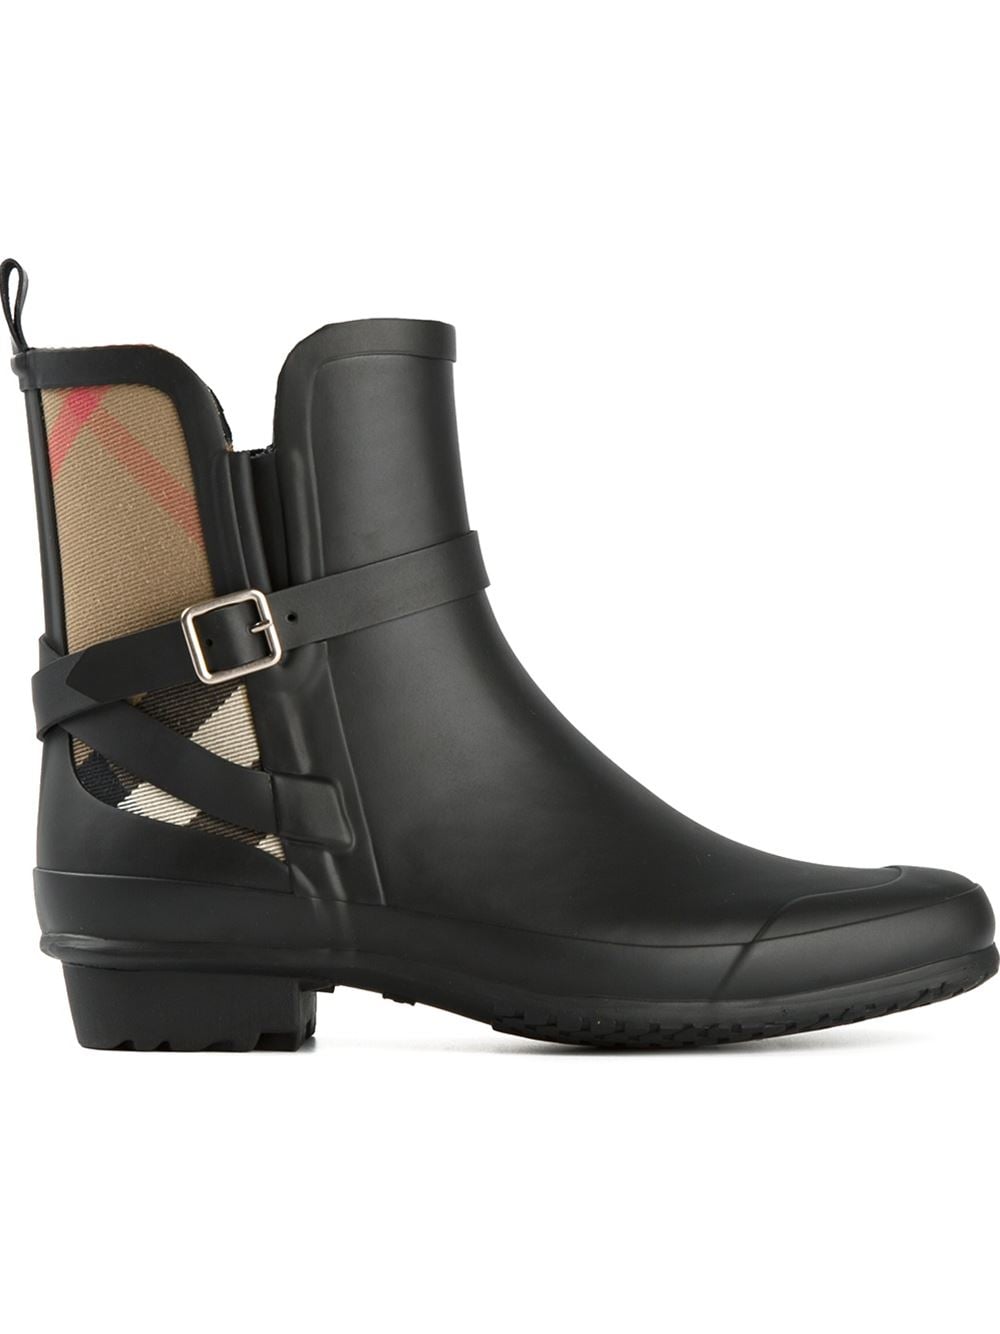 Burberry House Rain Boots | Give a Gift to Yourself — Shop Our Editors'  December Must Haves | POPSUGAR Fashion Photo 20